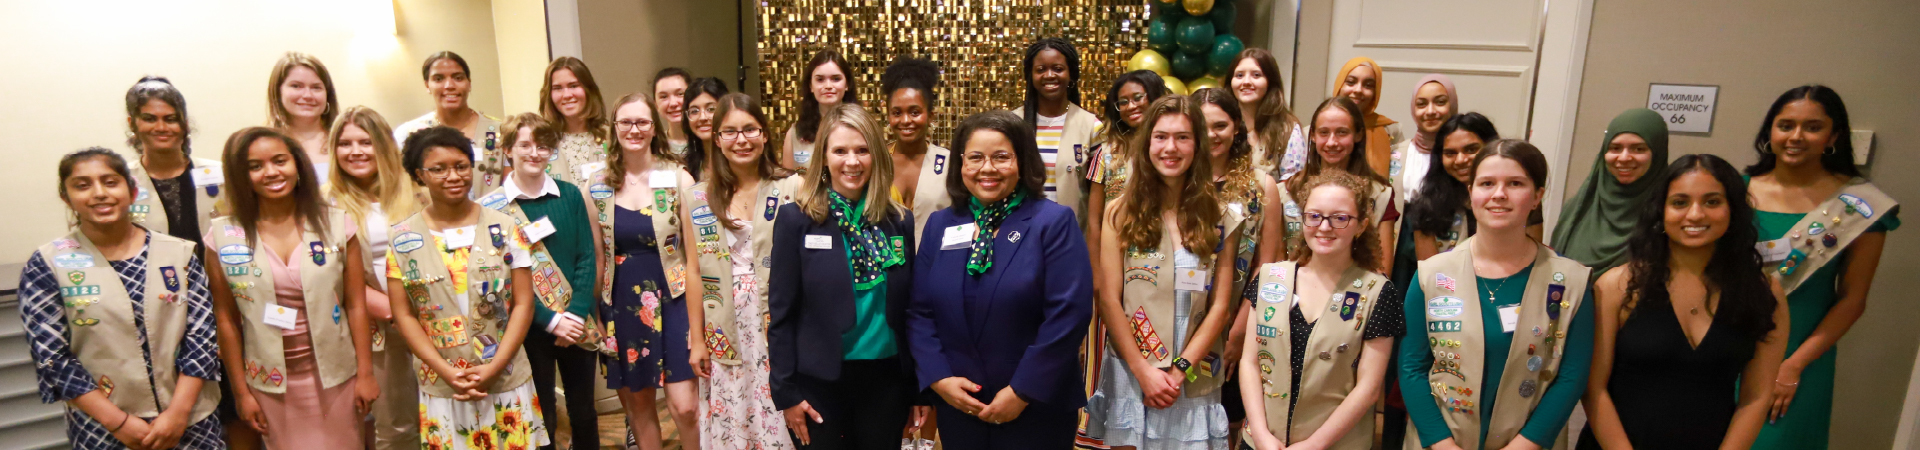  Gold Award Girl Scouts pose for group photo 